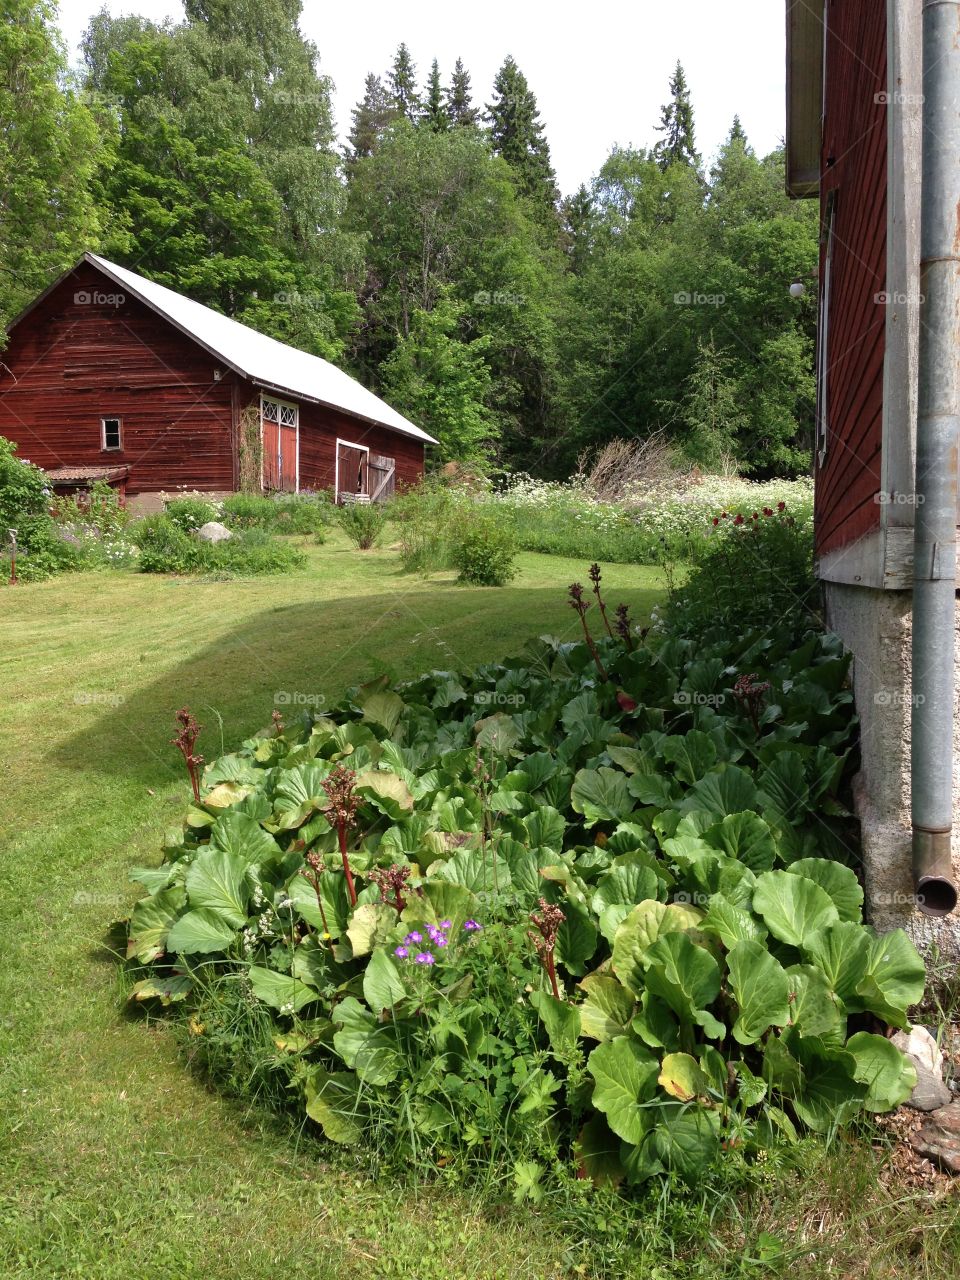 Barn and flower patch